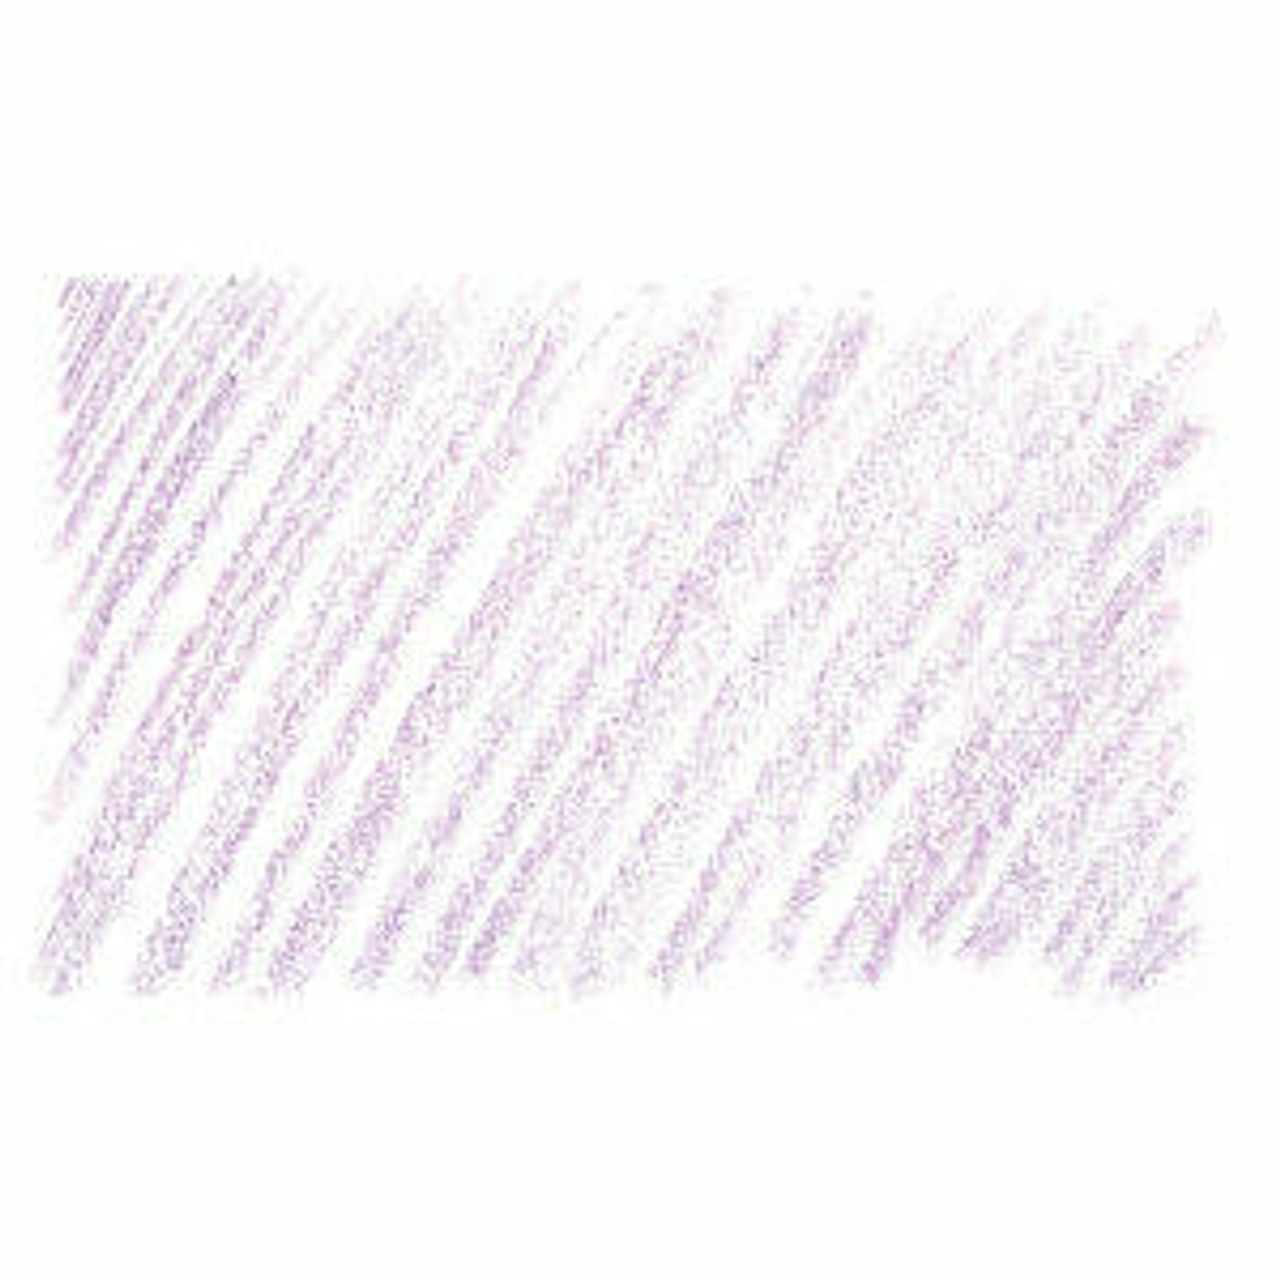 Stabilo Pen 68 Marker Light Lilac - Wet Paint Artists' Materials and Framing